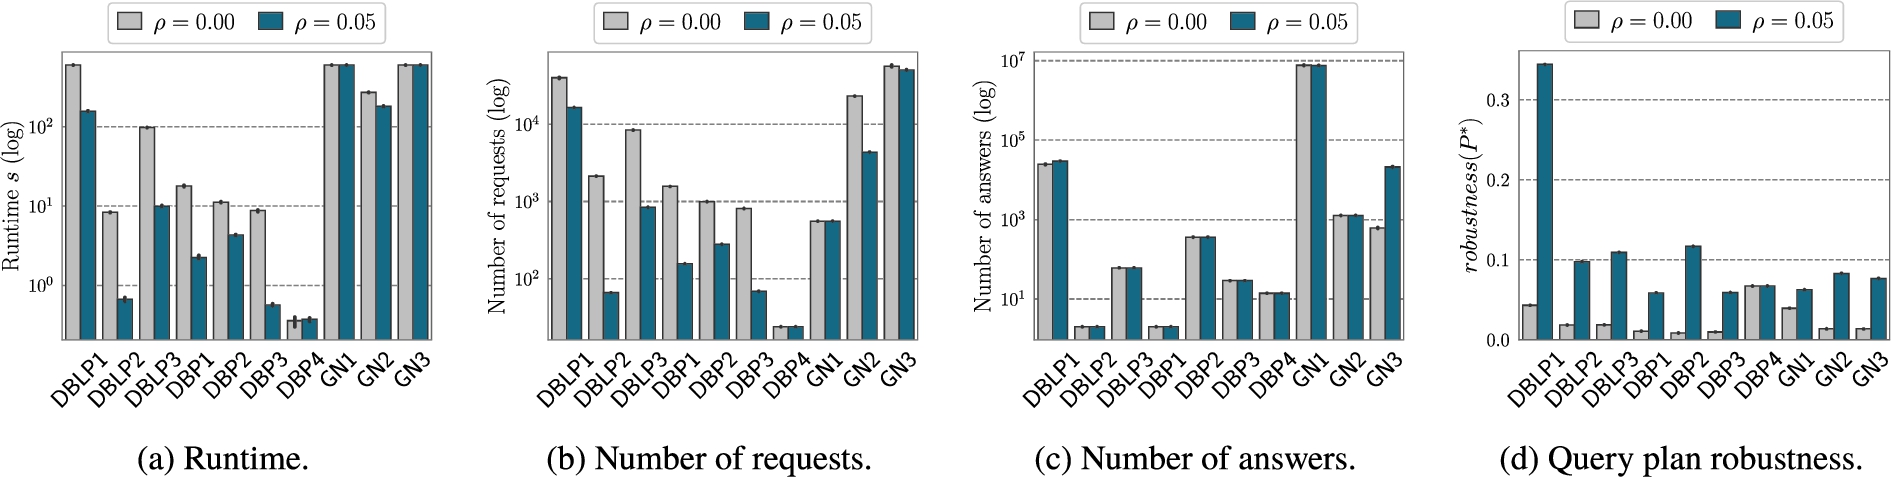 Custom testset: runtime, number of requests, number of answers, and query plan robustness for the 10 queries of the custom benchmark. Results compare CROP without robustness (ρ=0.00) and with robustness (ρ=0.05).